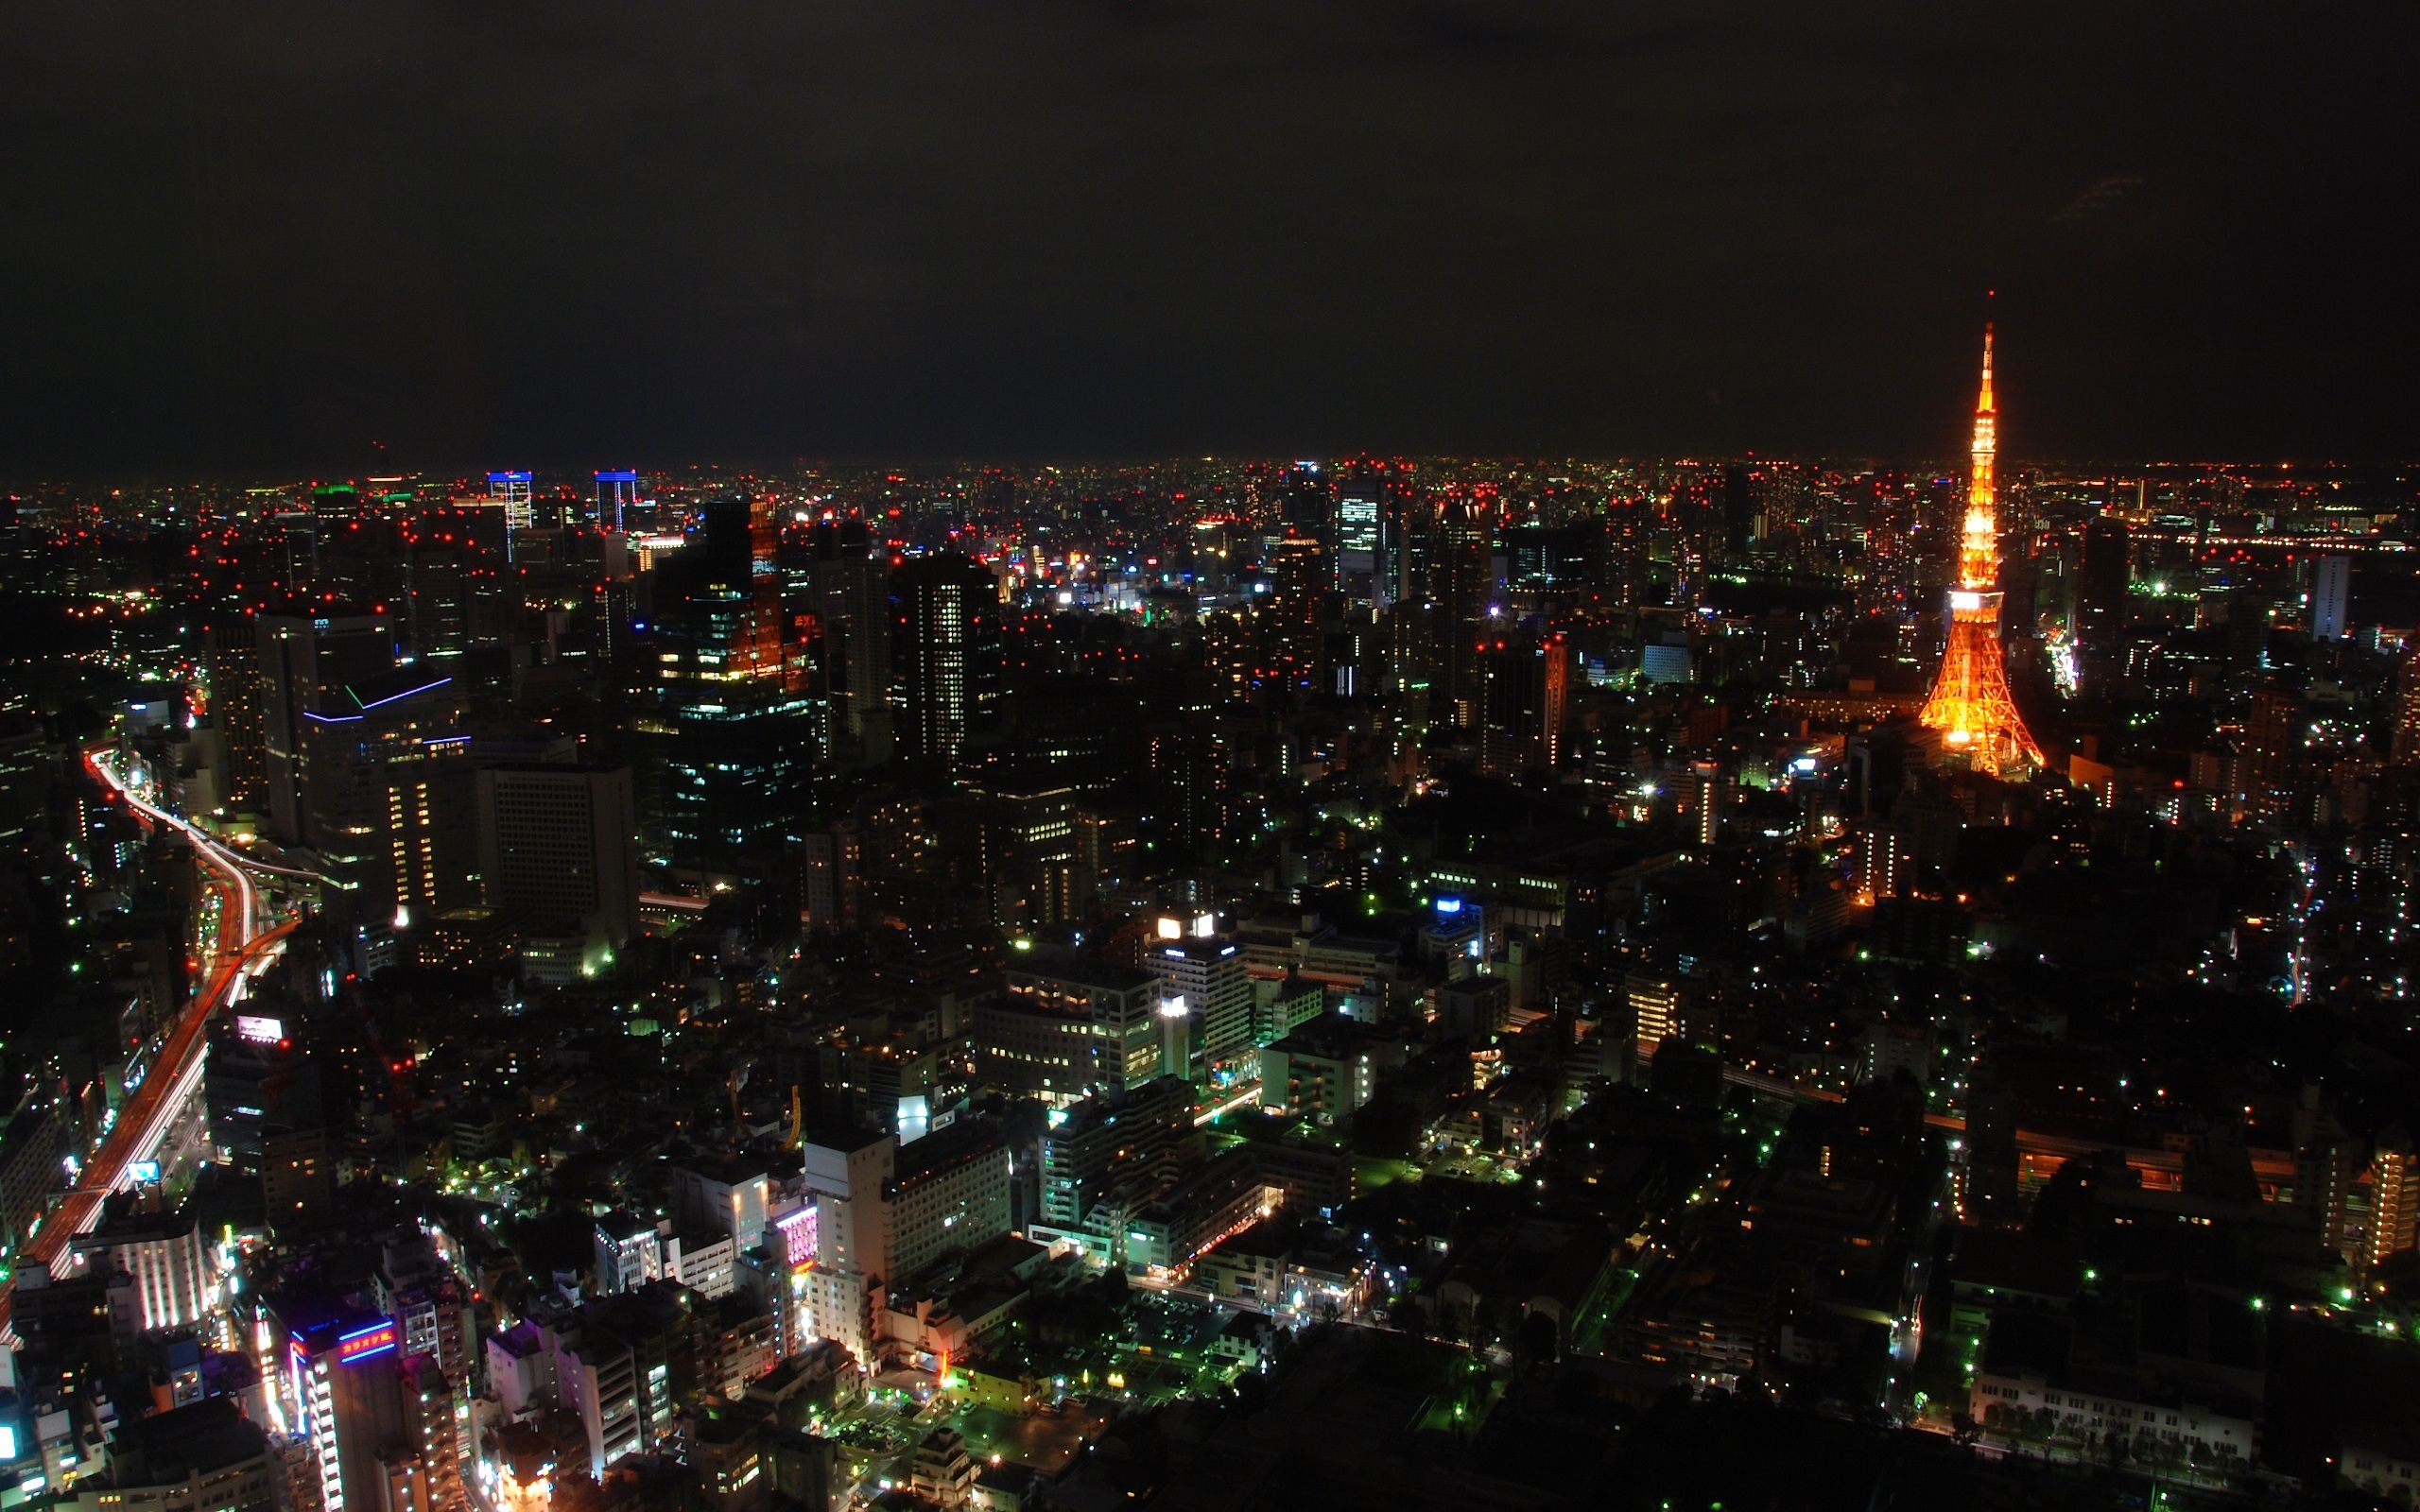 Free download Wallpaper Festival of Lights Tokyo at Night is a